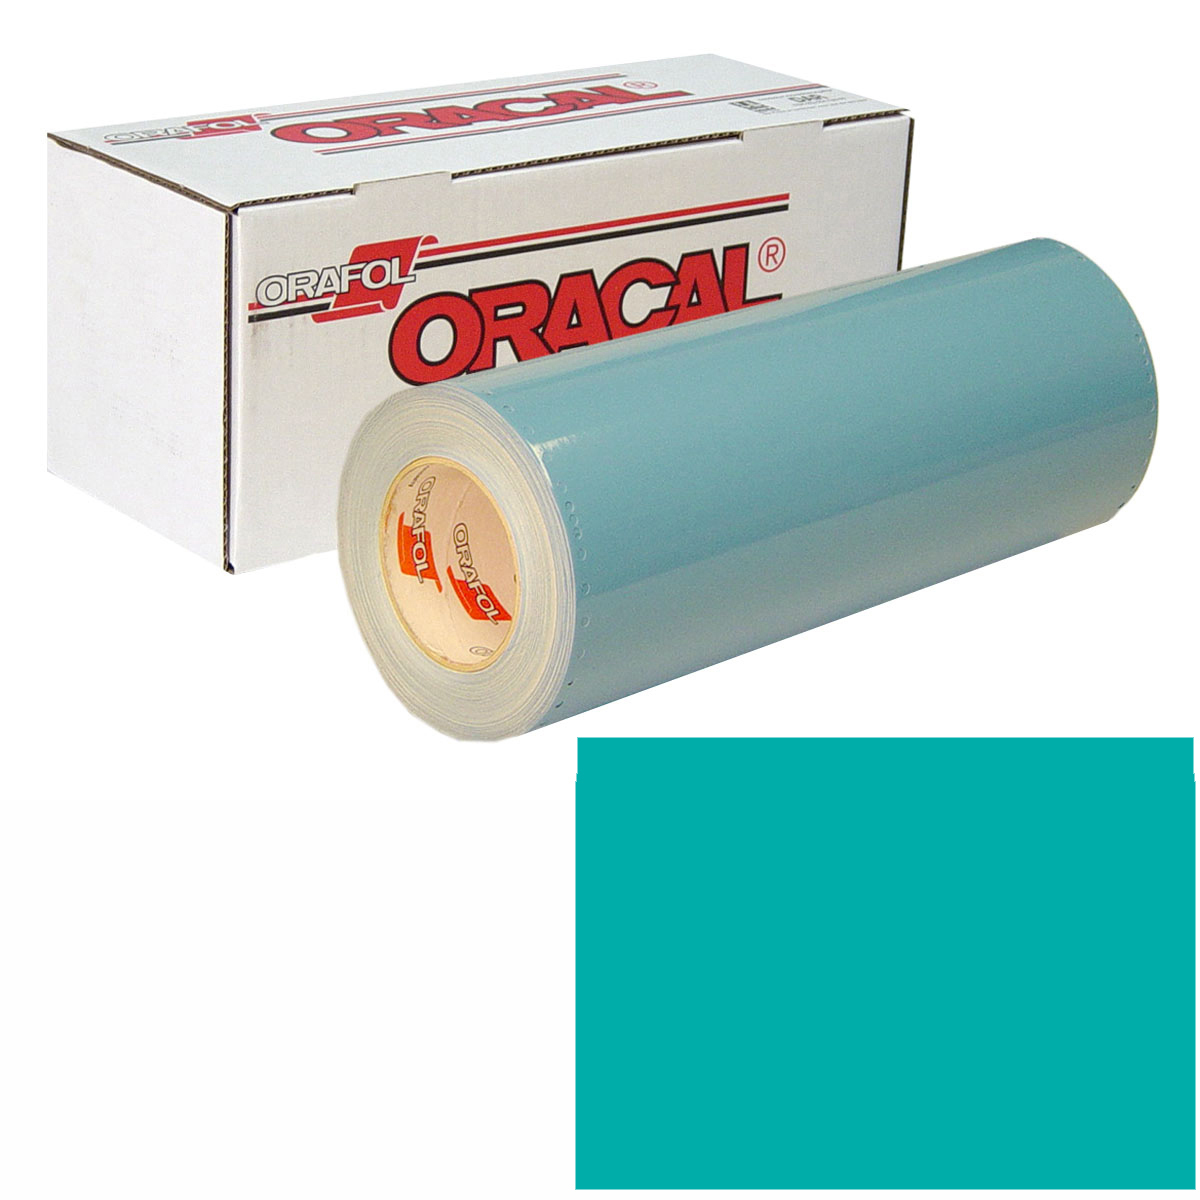 ORACAL 751 30in X 50yd 054 Turquoise